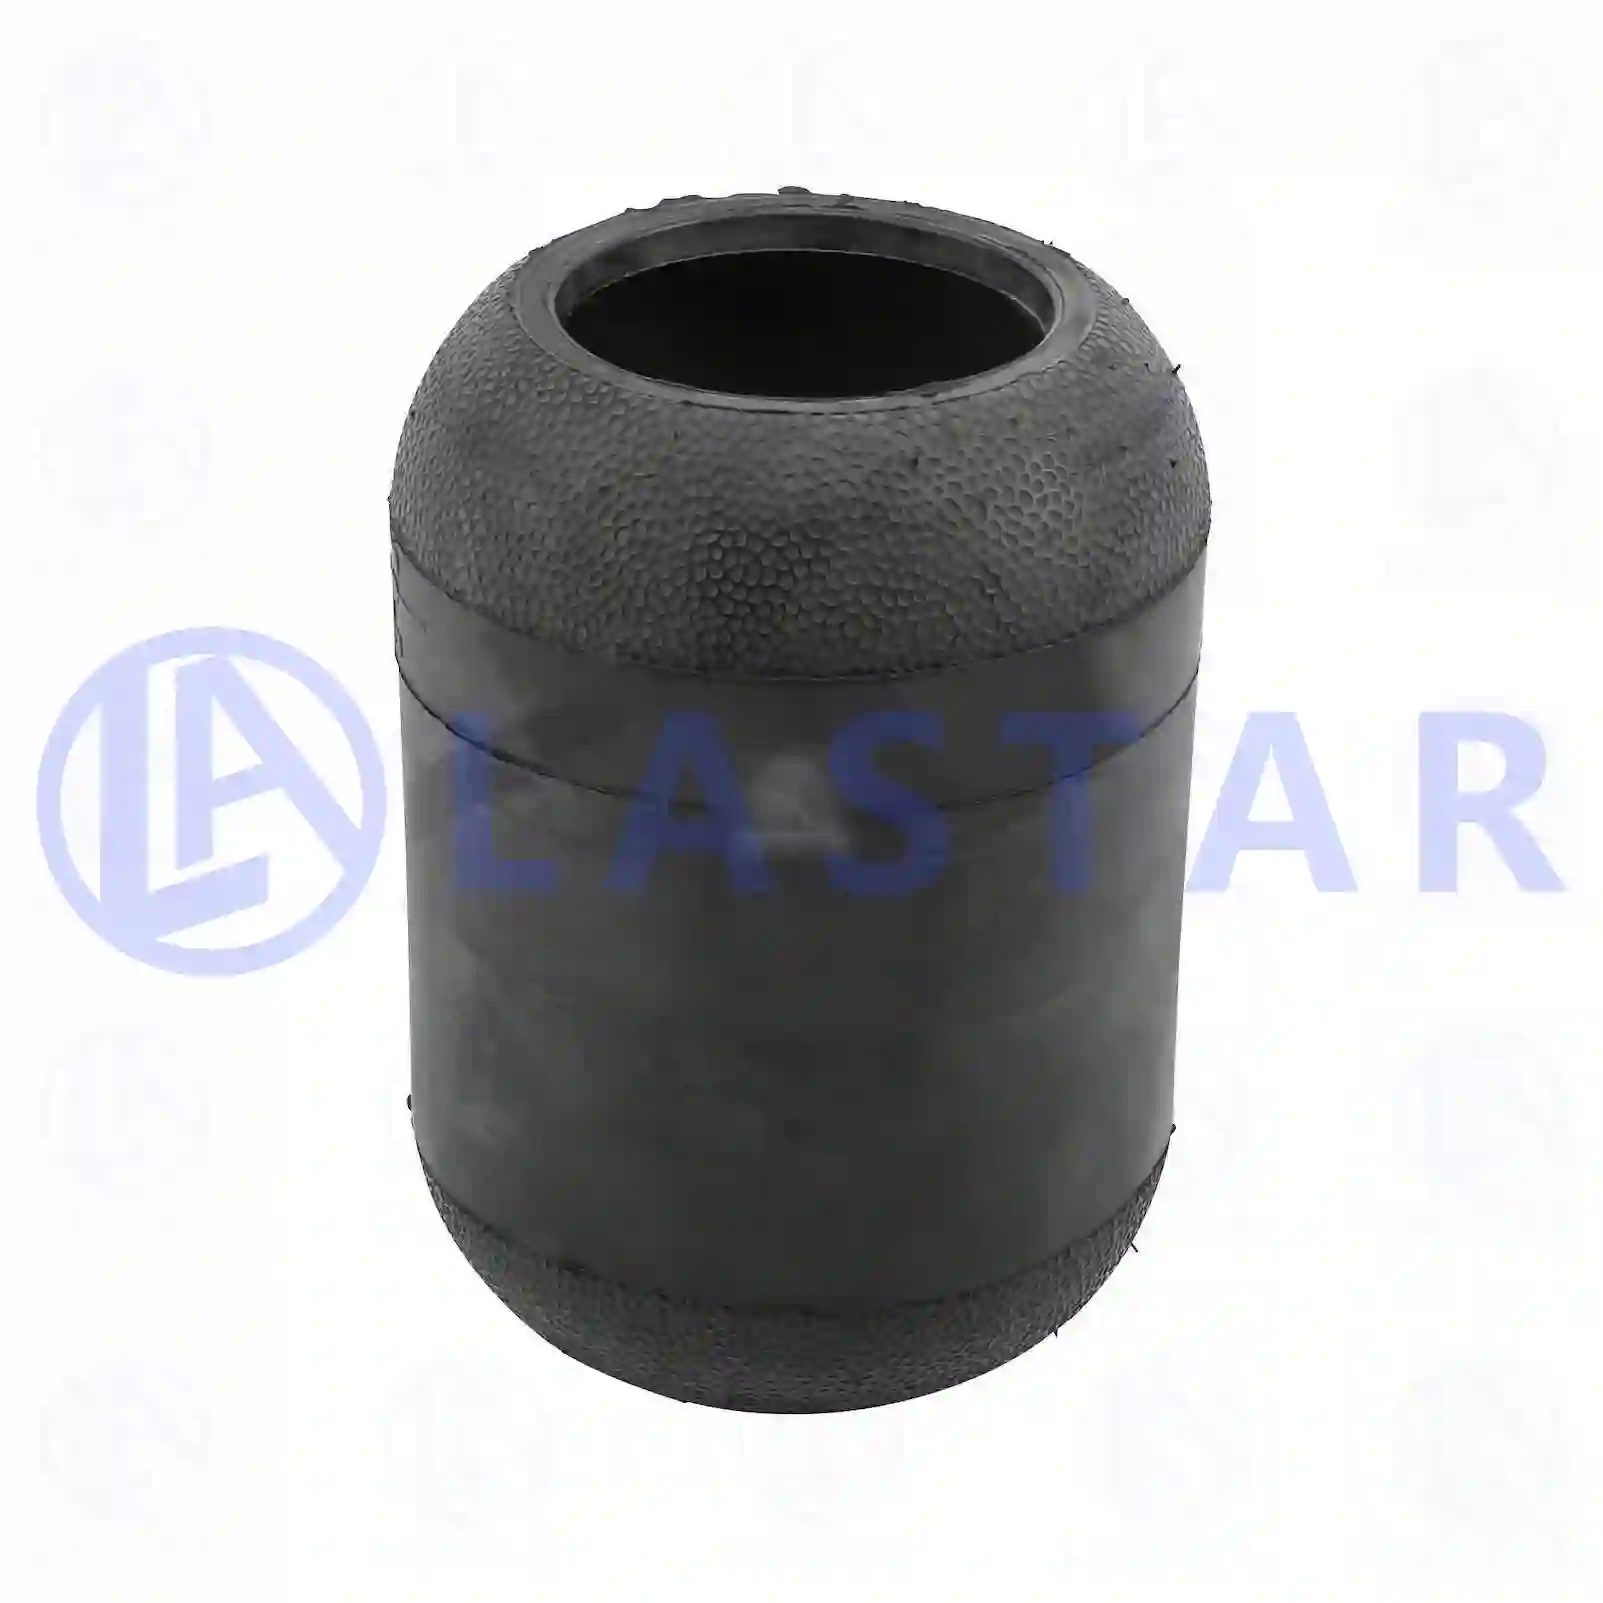 Air spring, without piston, 77727617, 41008929, 42554430, 500055251 ||  77727617 Lastar Spare Part | Truck Spare Parts, Auotomotive Spare Parts Air spring, without piston, 77727617, 41008929, 42554430, 500055251 ||  77727617 Lastar Spare Part | Truck Spare Parts, Auotomotive Spare Parts